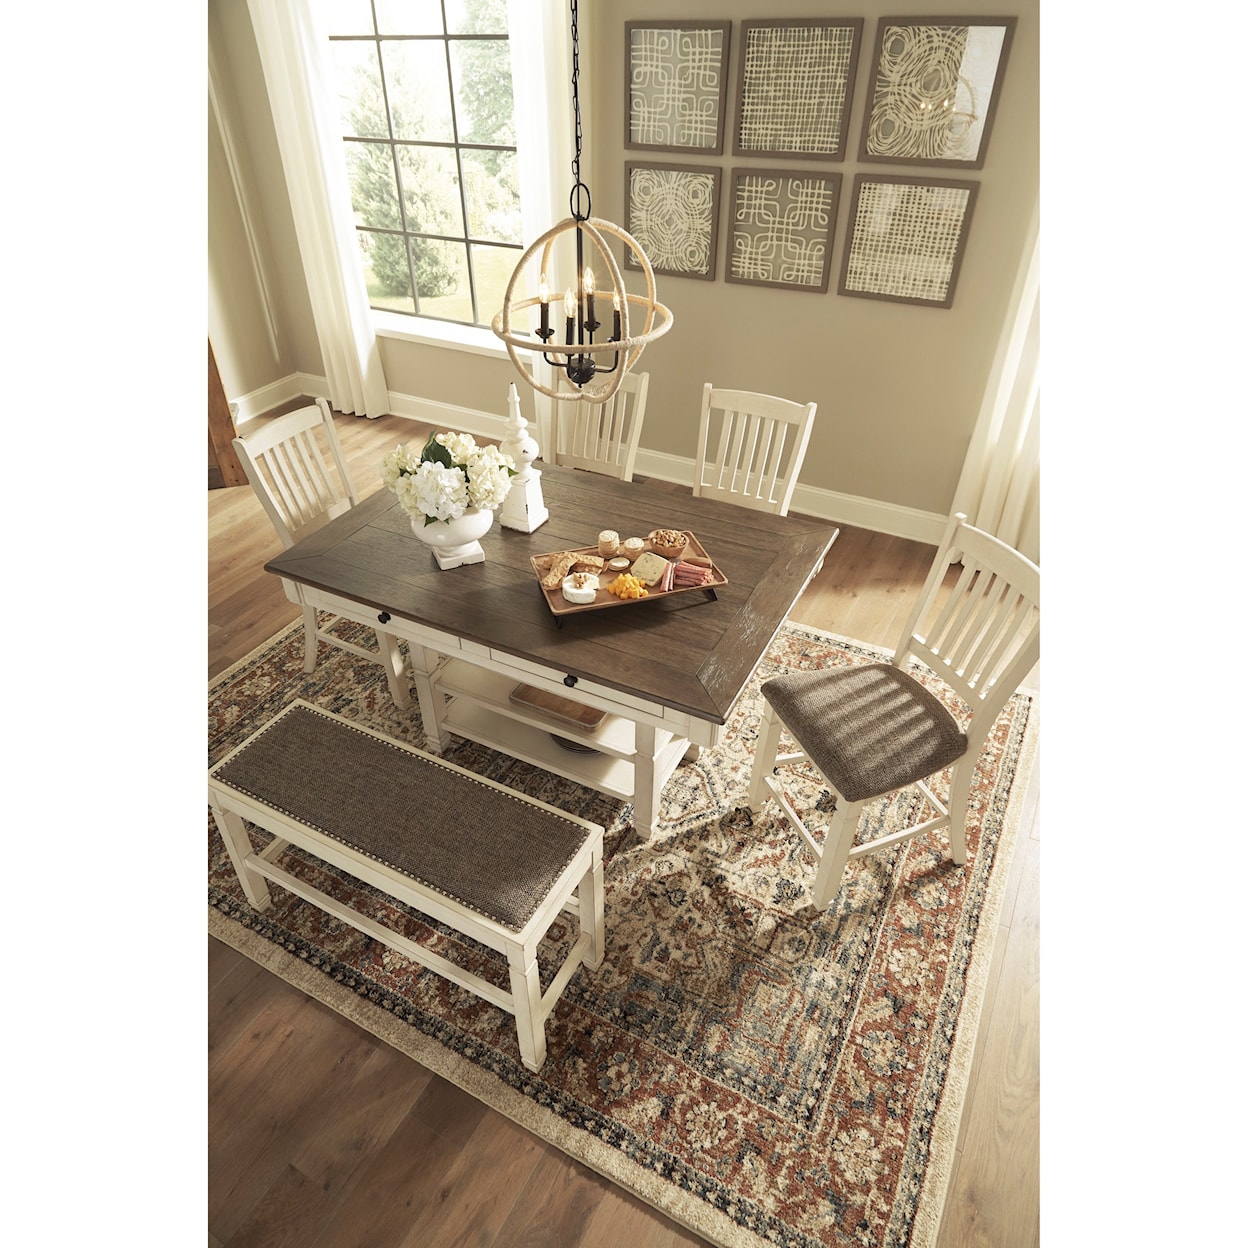 Ashley Furniture Signature Design Bolanburg 6-Piece Counter Table Set with Bench